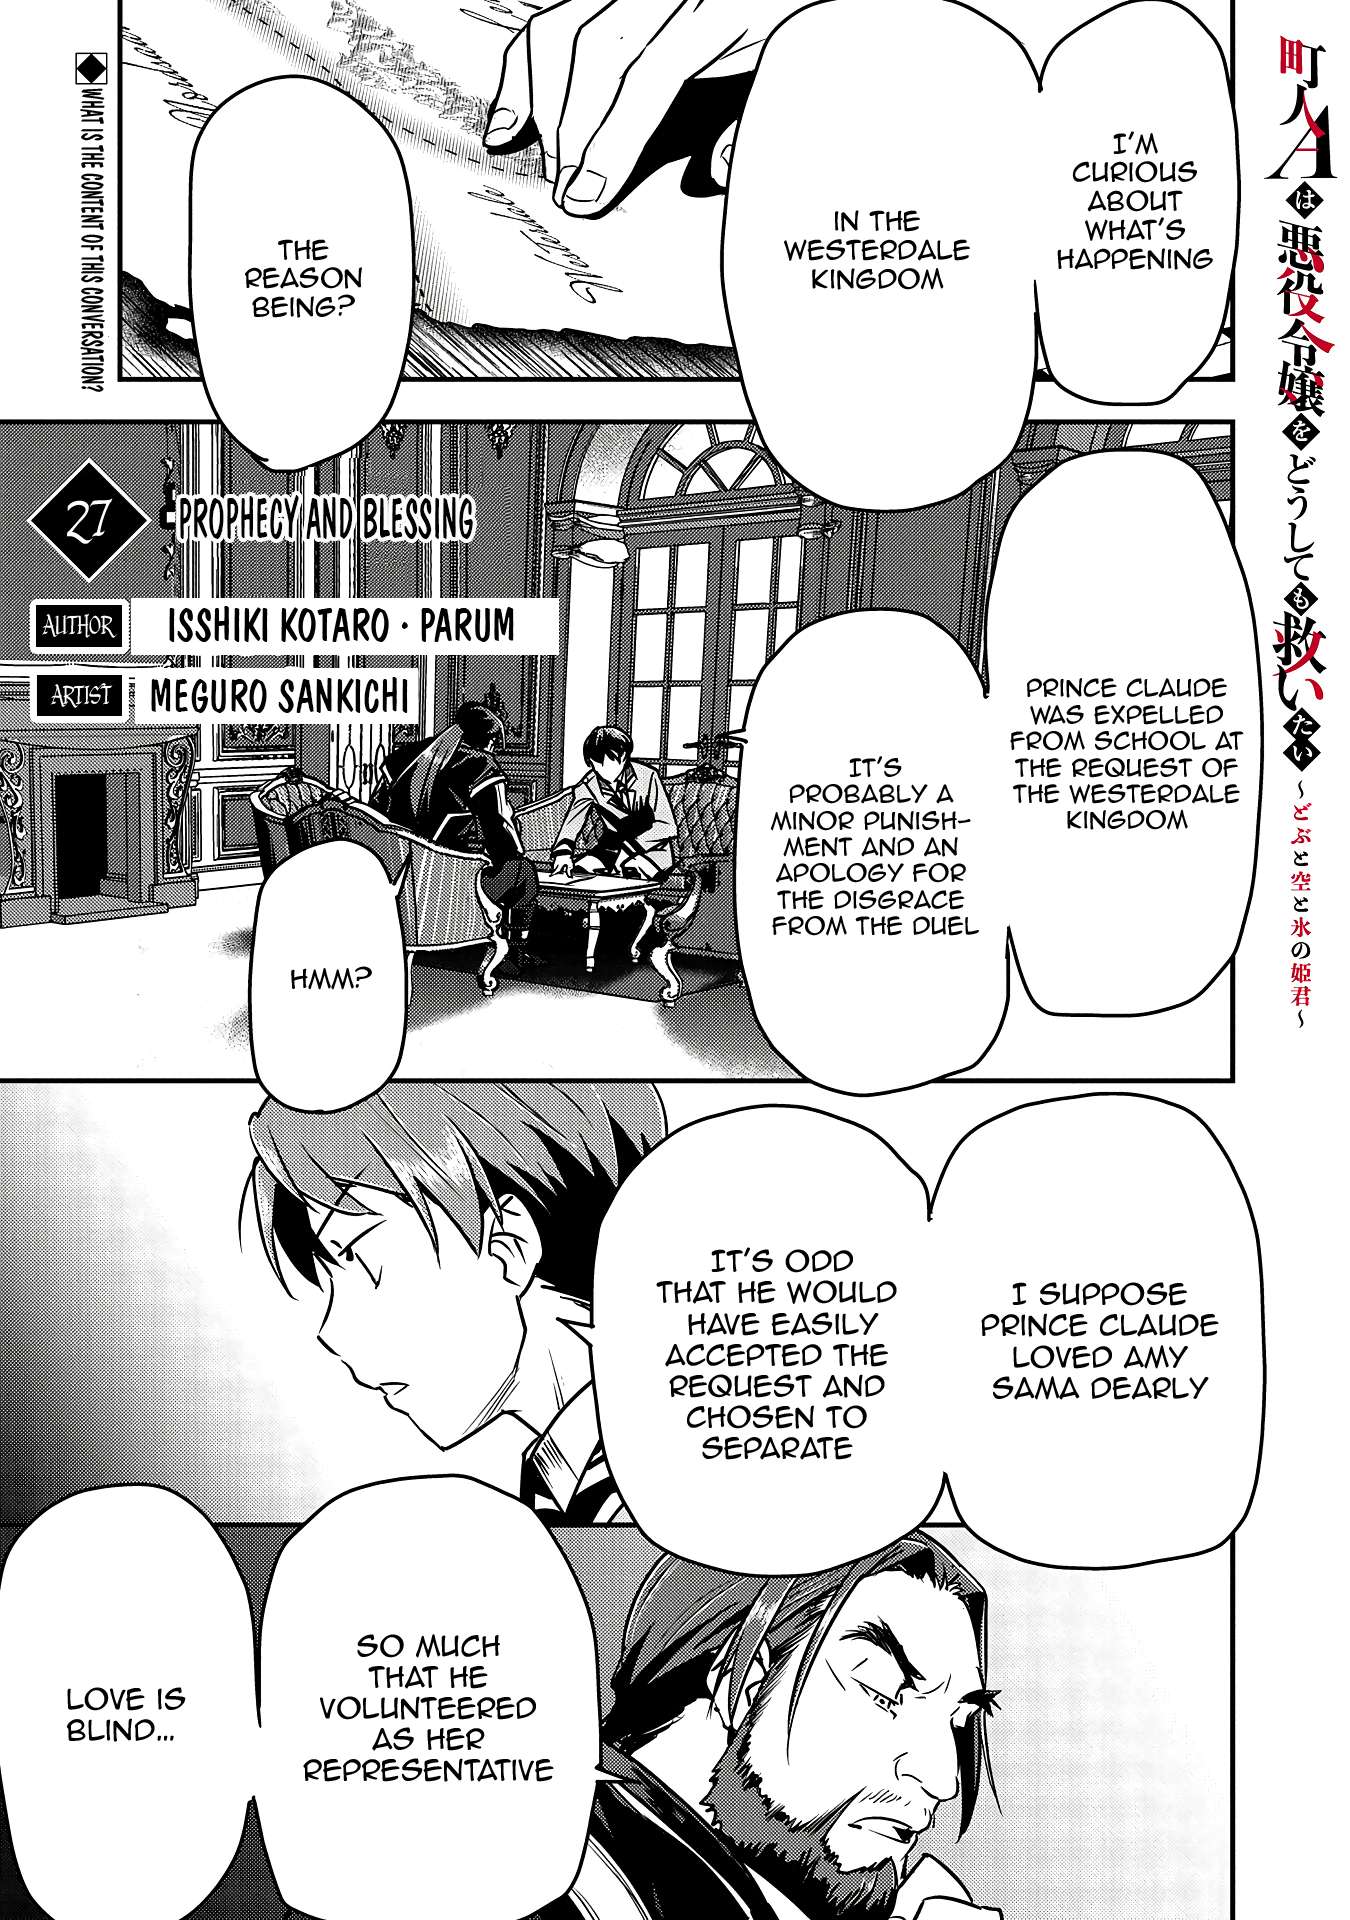 Villager A Wants To Save The Villainess No Matter What! - chapter 27 - #1